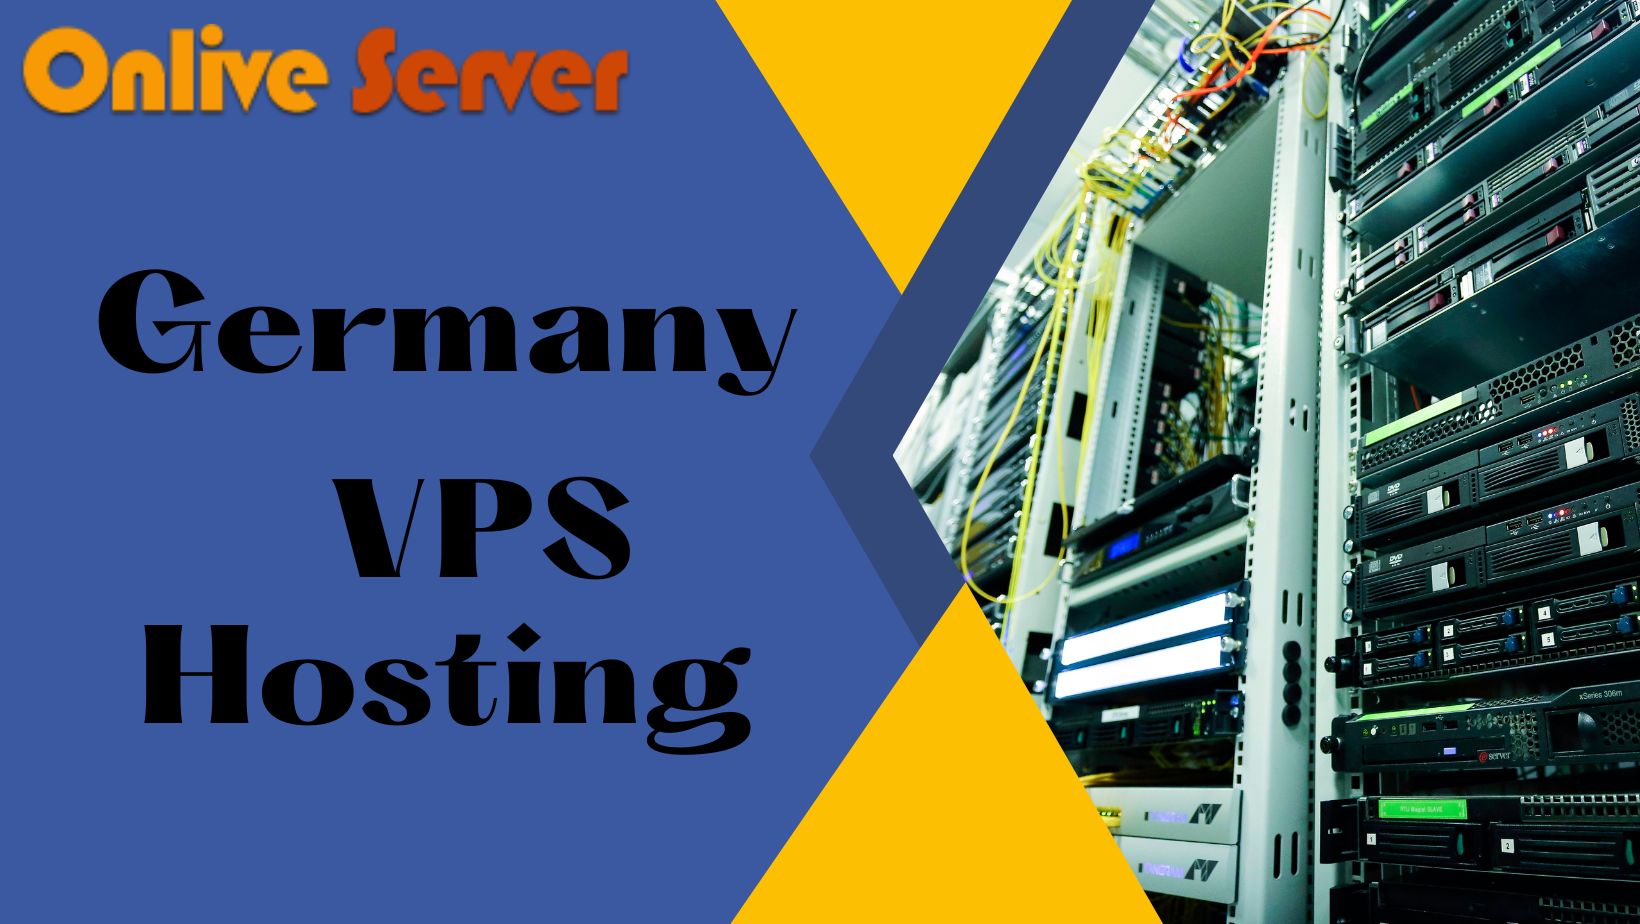 Choose Germany VPS Hosting To Build Your Online Presence